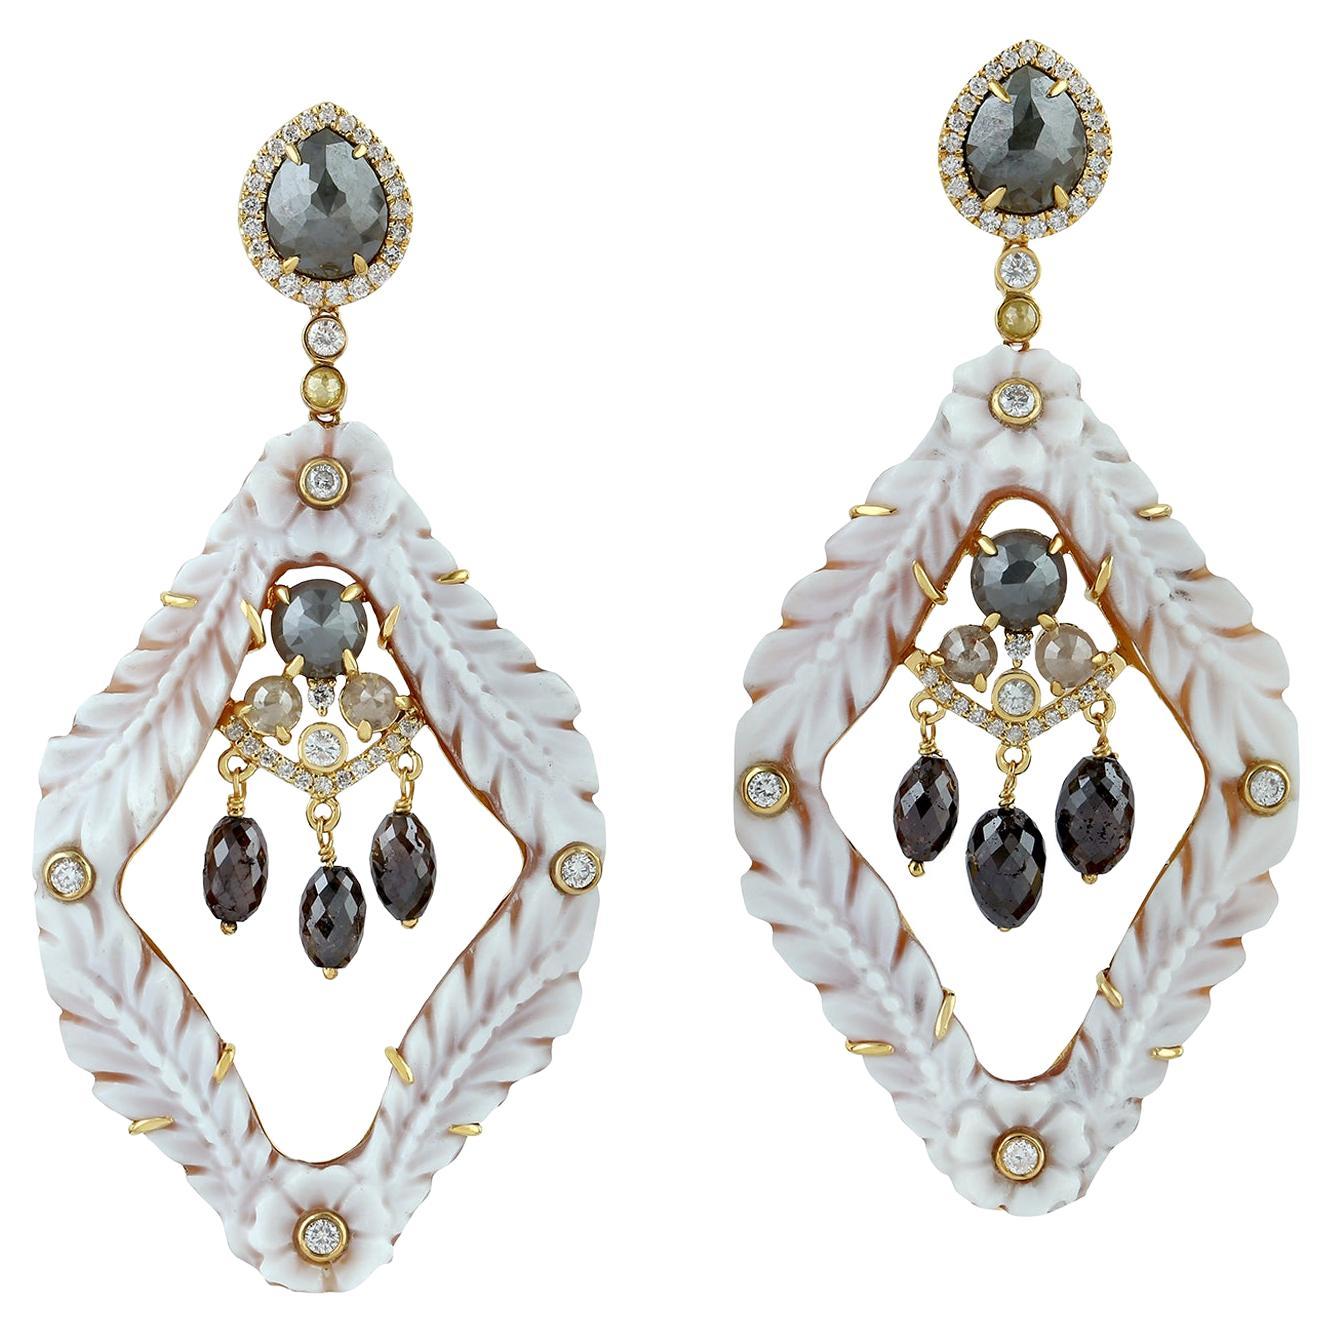 Shell Cameo Dangle Earrings With Diamonds Made in 18K Yellow Gold